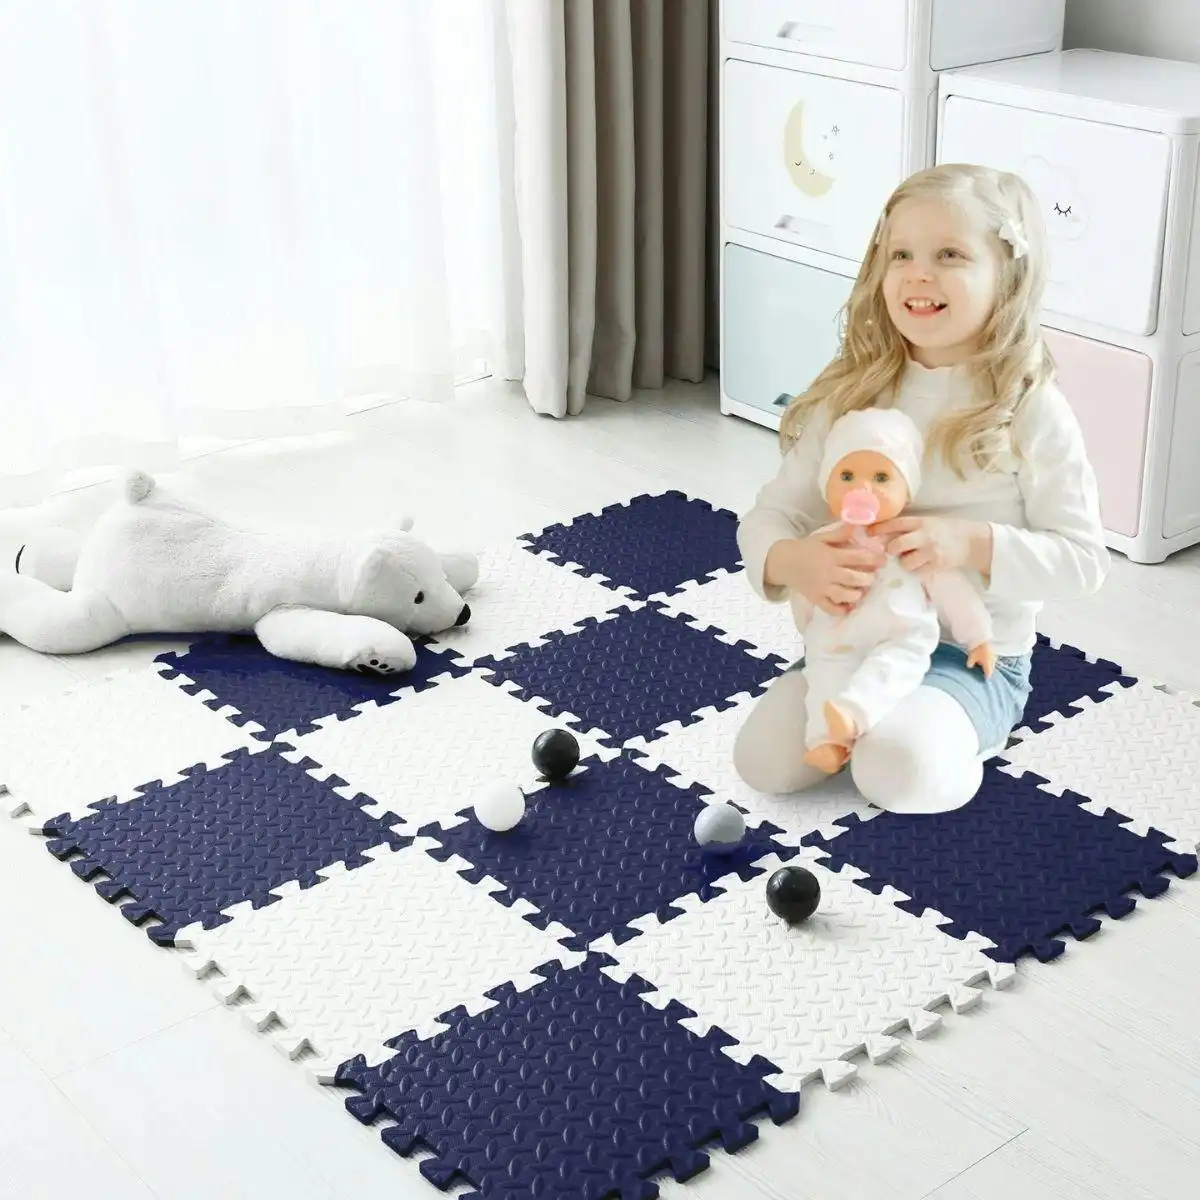 BabiesMart SoftSteps Play Mat Safe, Thick & Non-Slippery For Baby Playpen